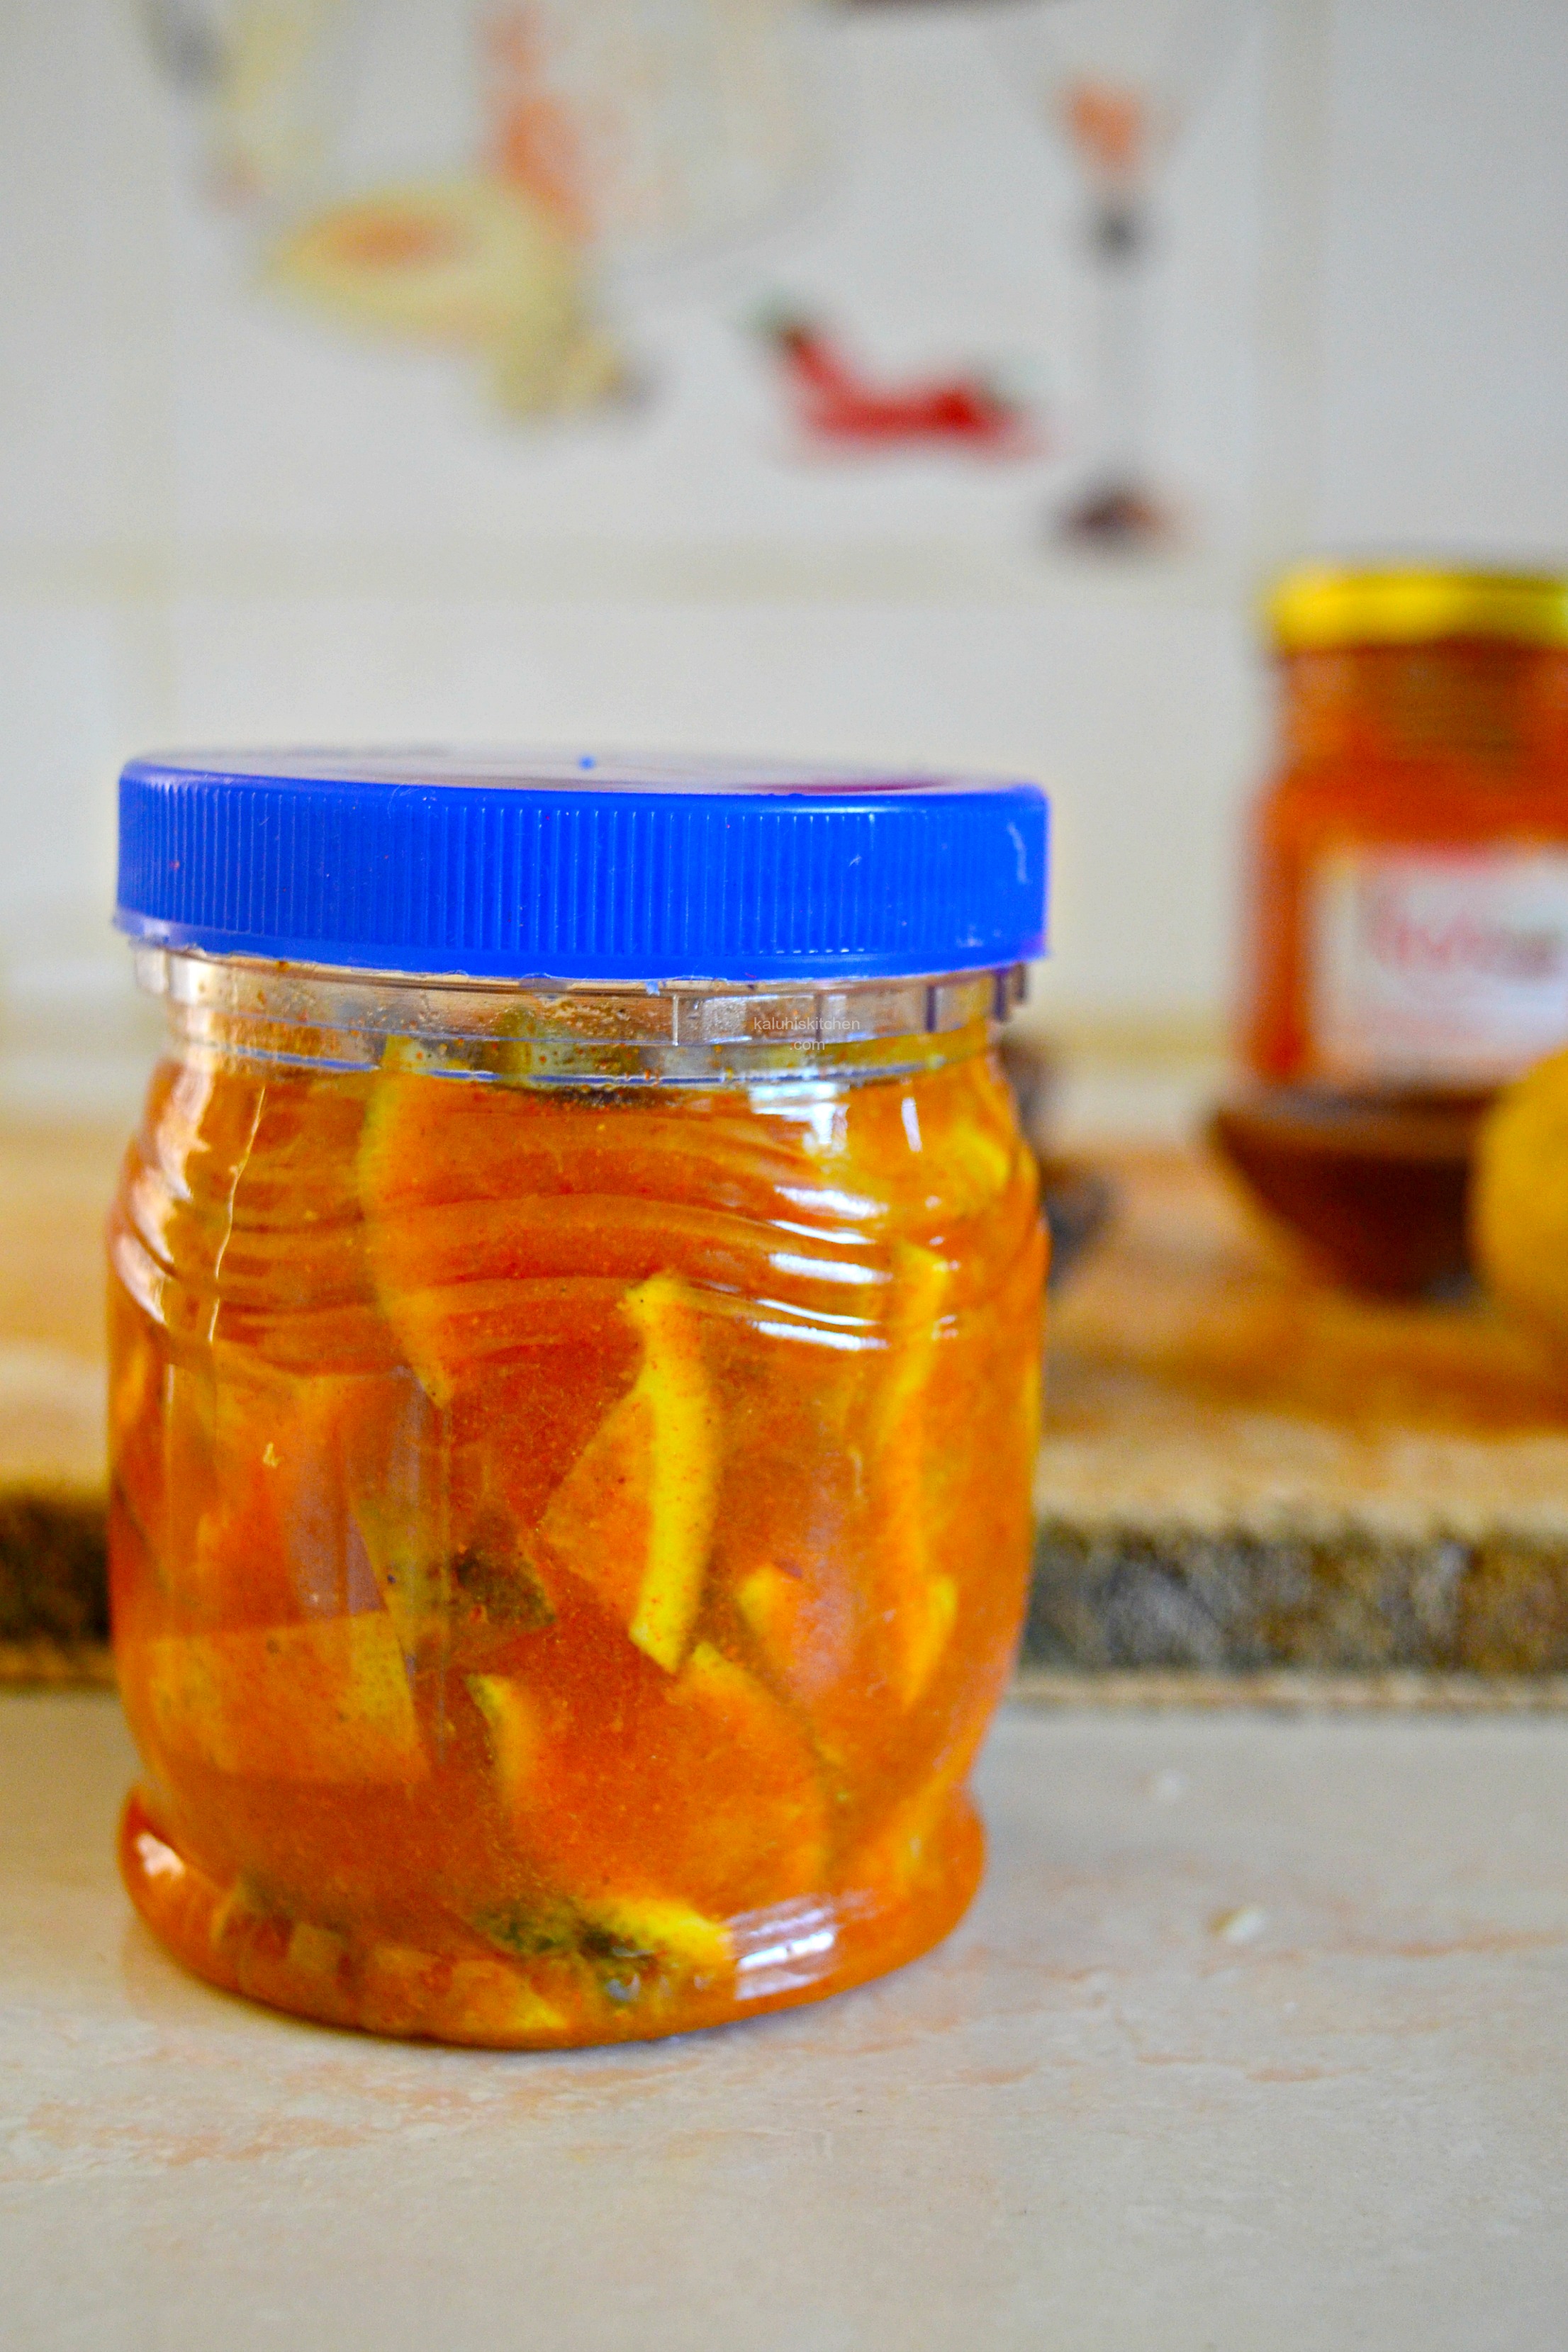 allow-your-achari-to-pickle-for-about-3-5-days-so-that-the-rinds-soften-and-the-juice-thickens_kaluhiskitchen-com